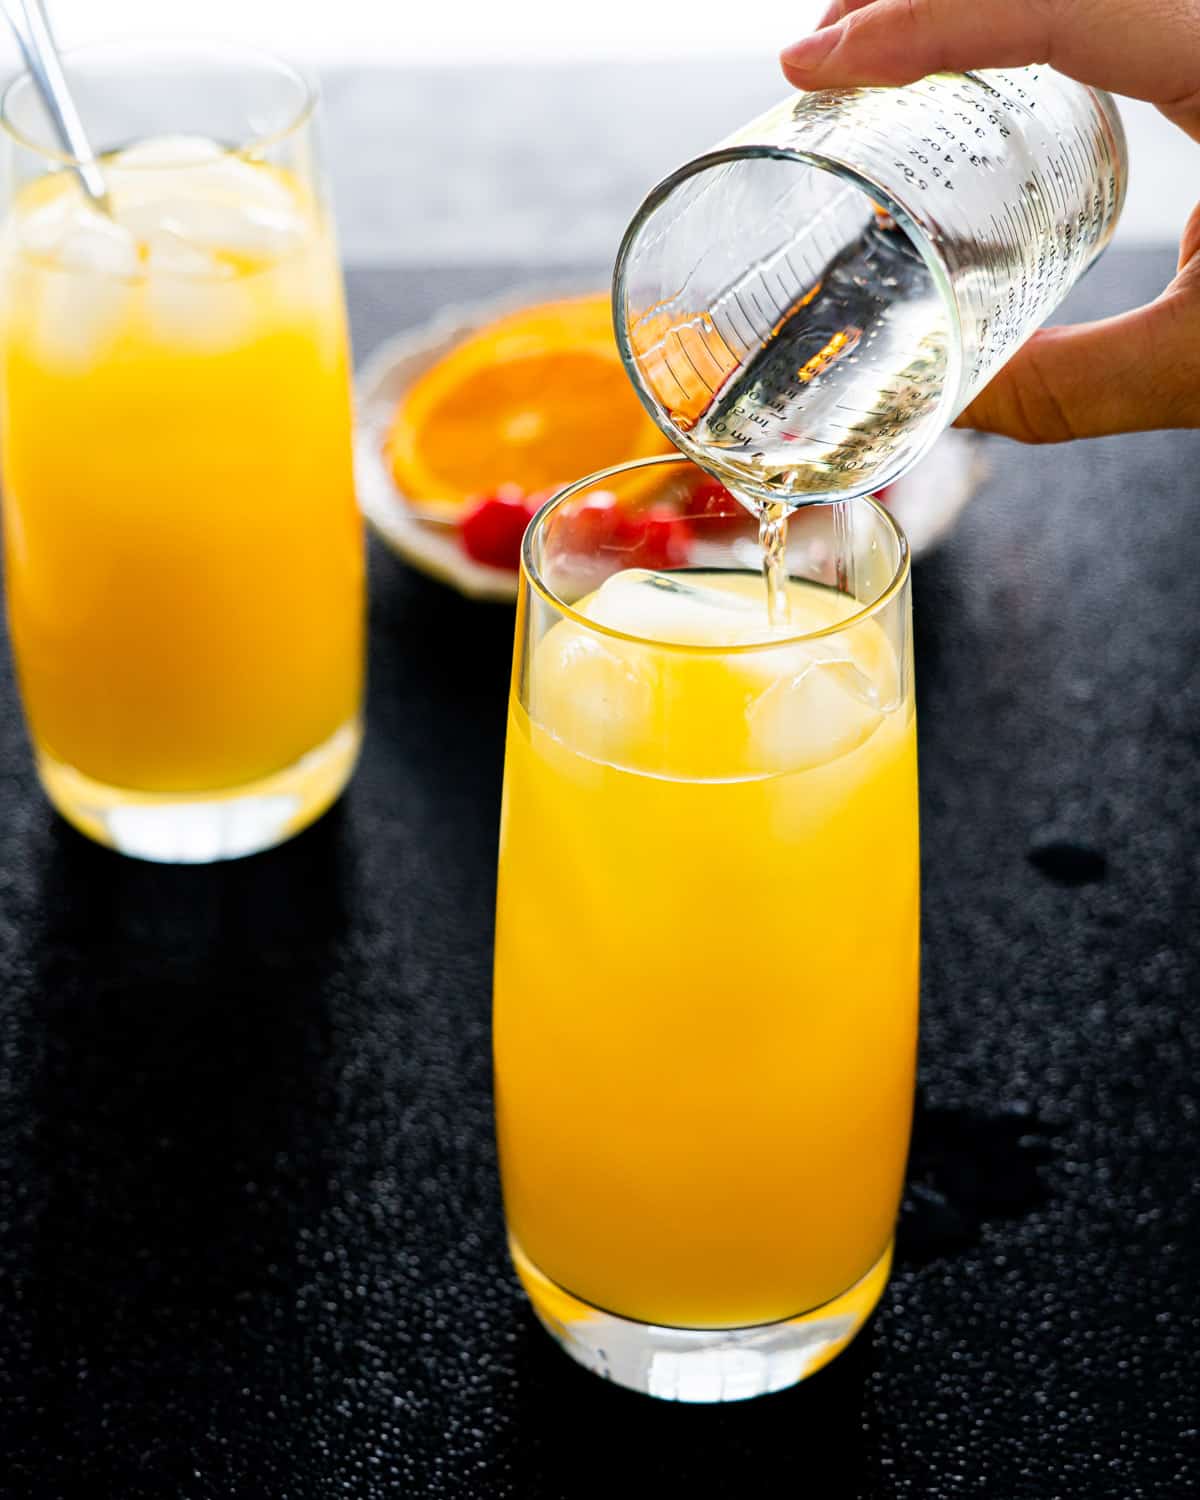 a hand pouring tequila in a glass full with orange and ice